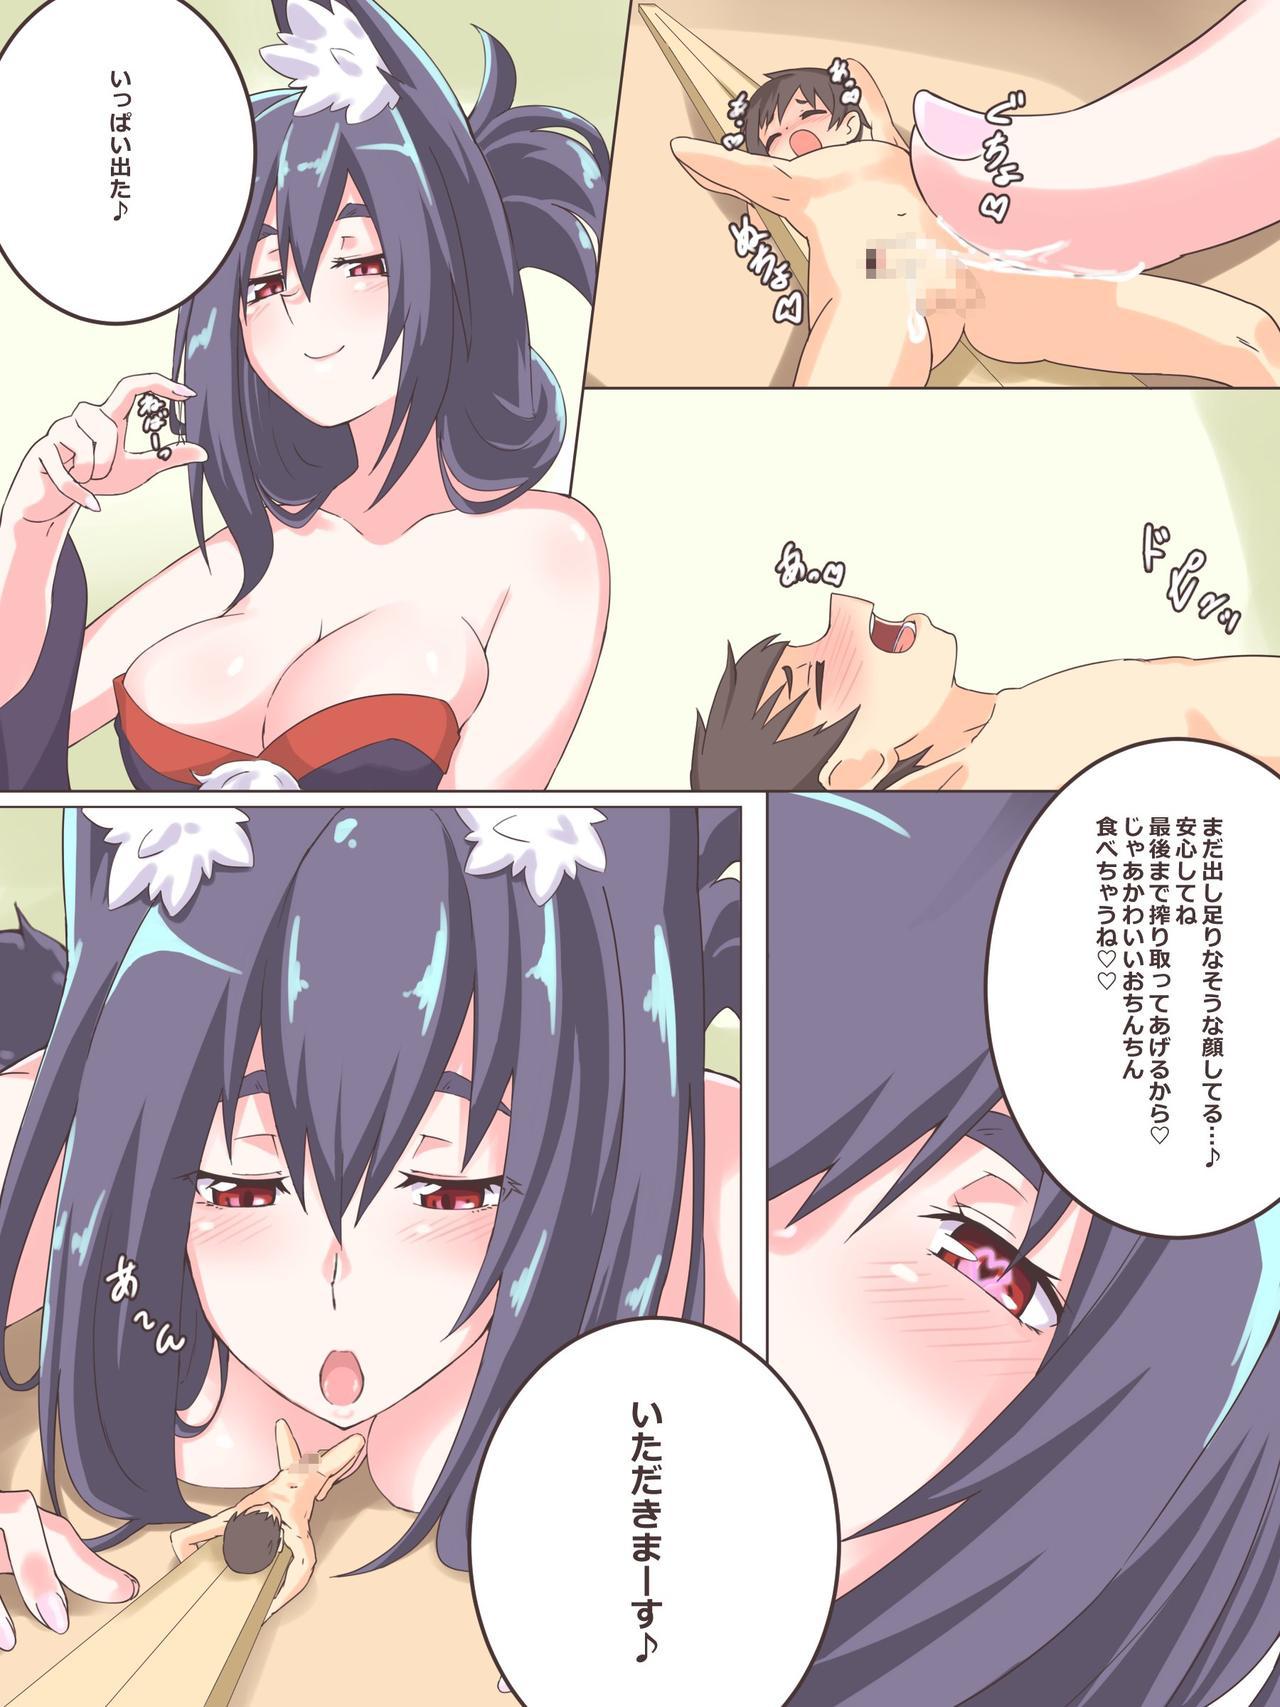 Uncensored にわかポテト(Mサイズ) Small Vore Doujinshi 2 - Original Cum On Face - Page 3